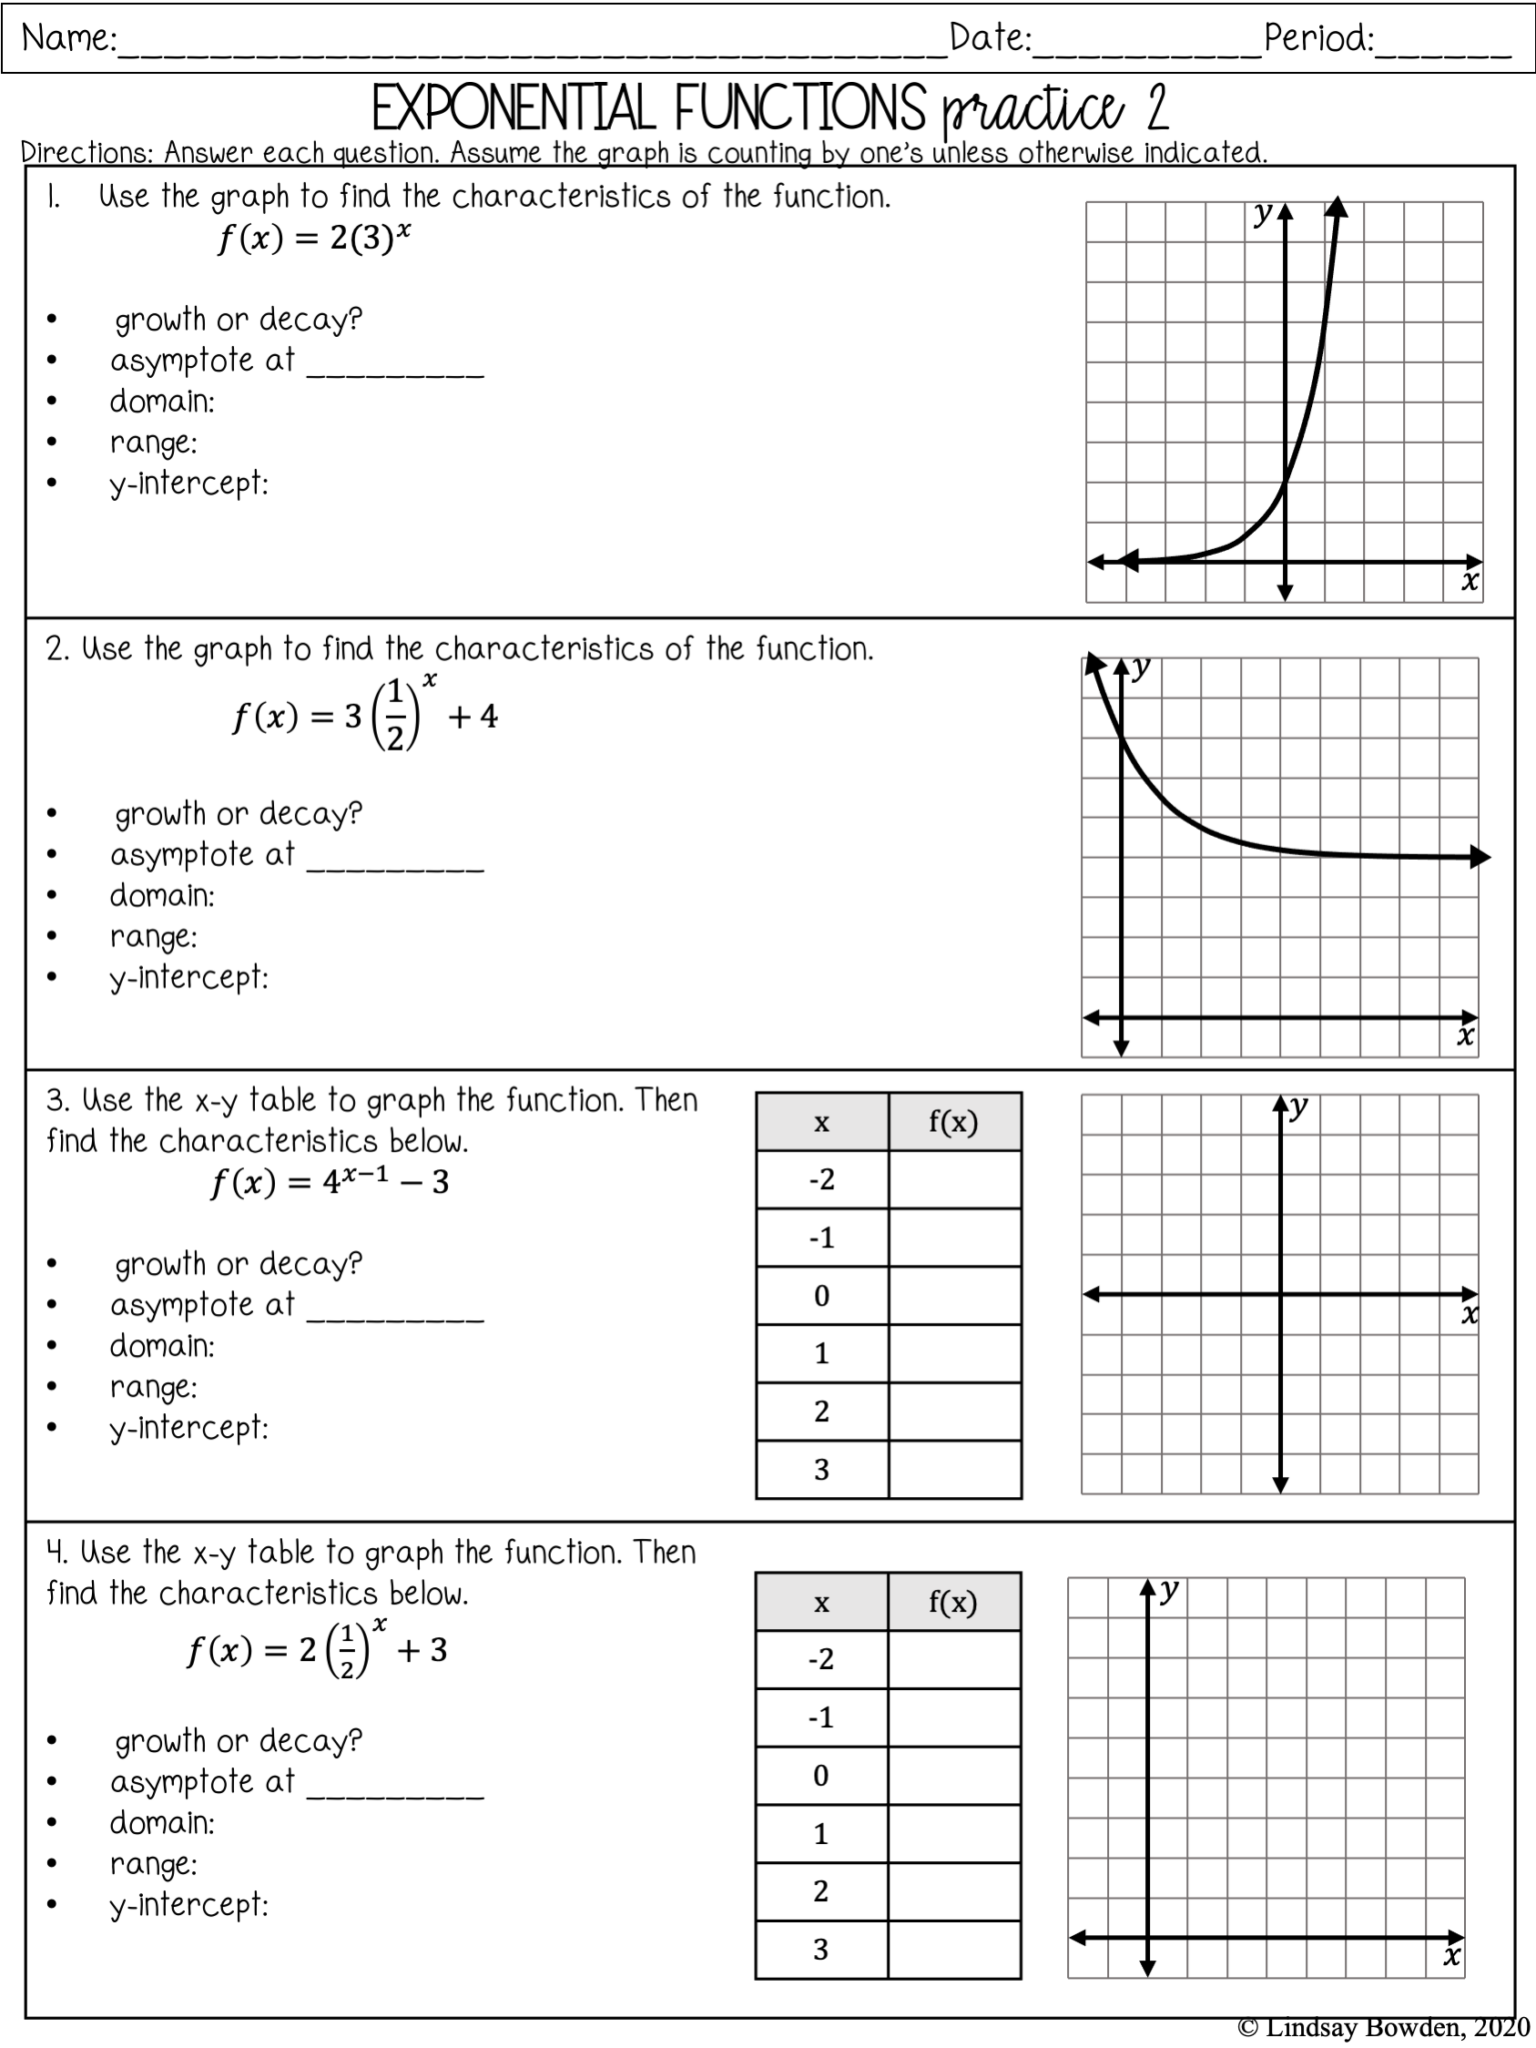 Exponential Functions Notes and Worksheets Lindsay Bowden